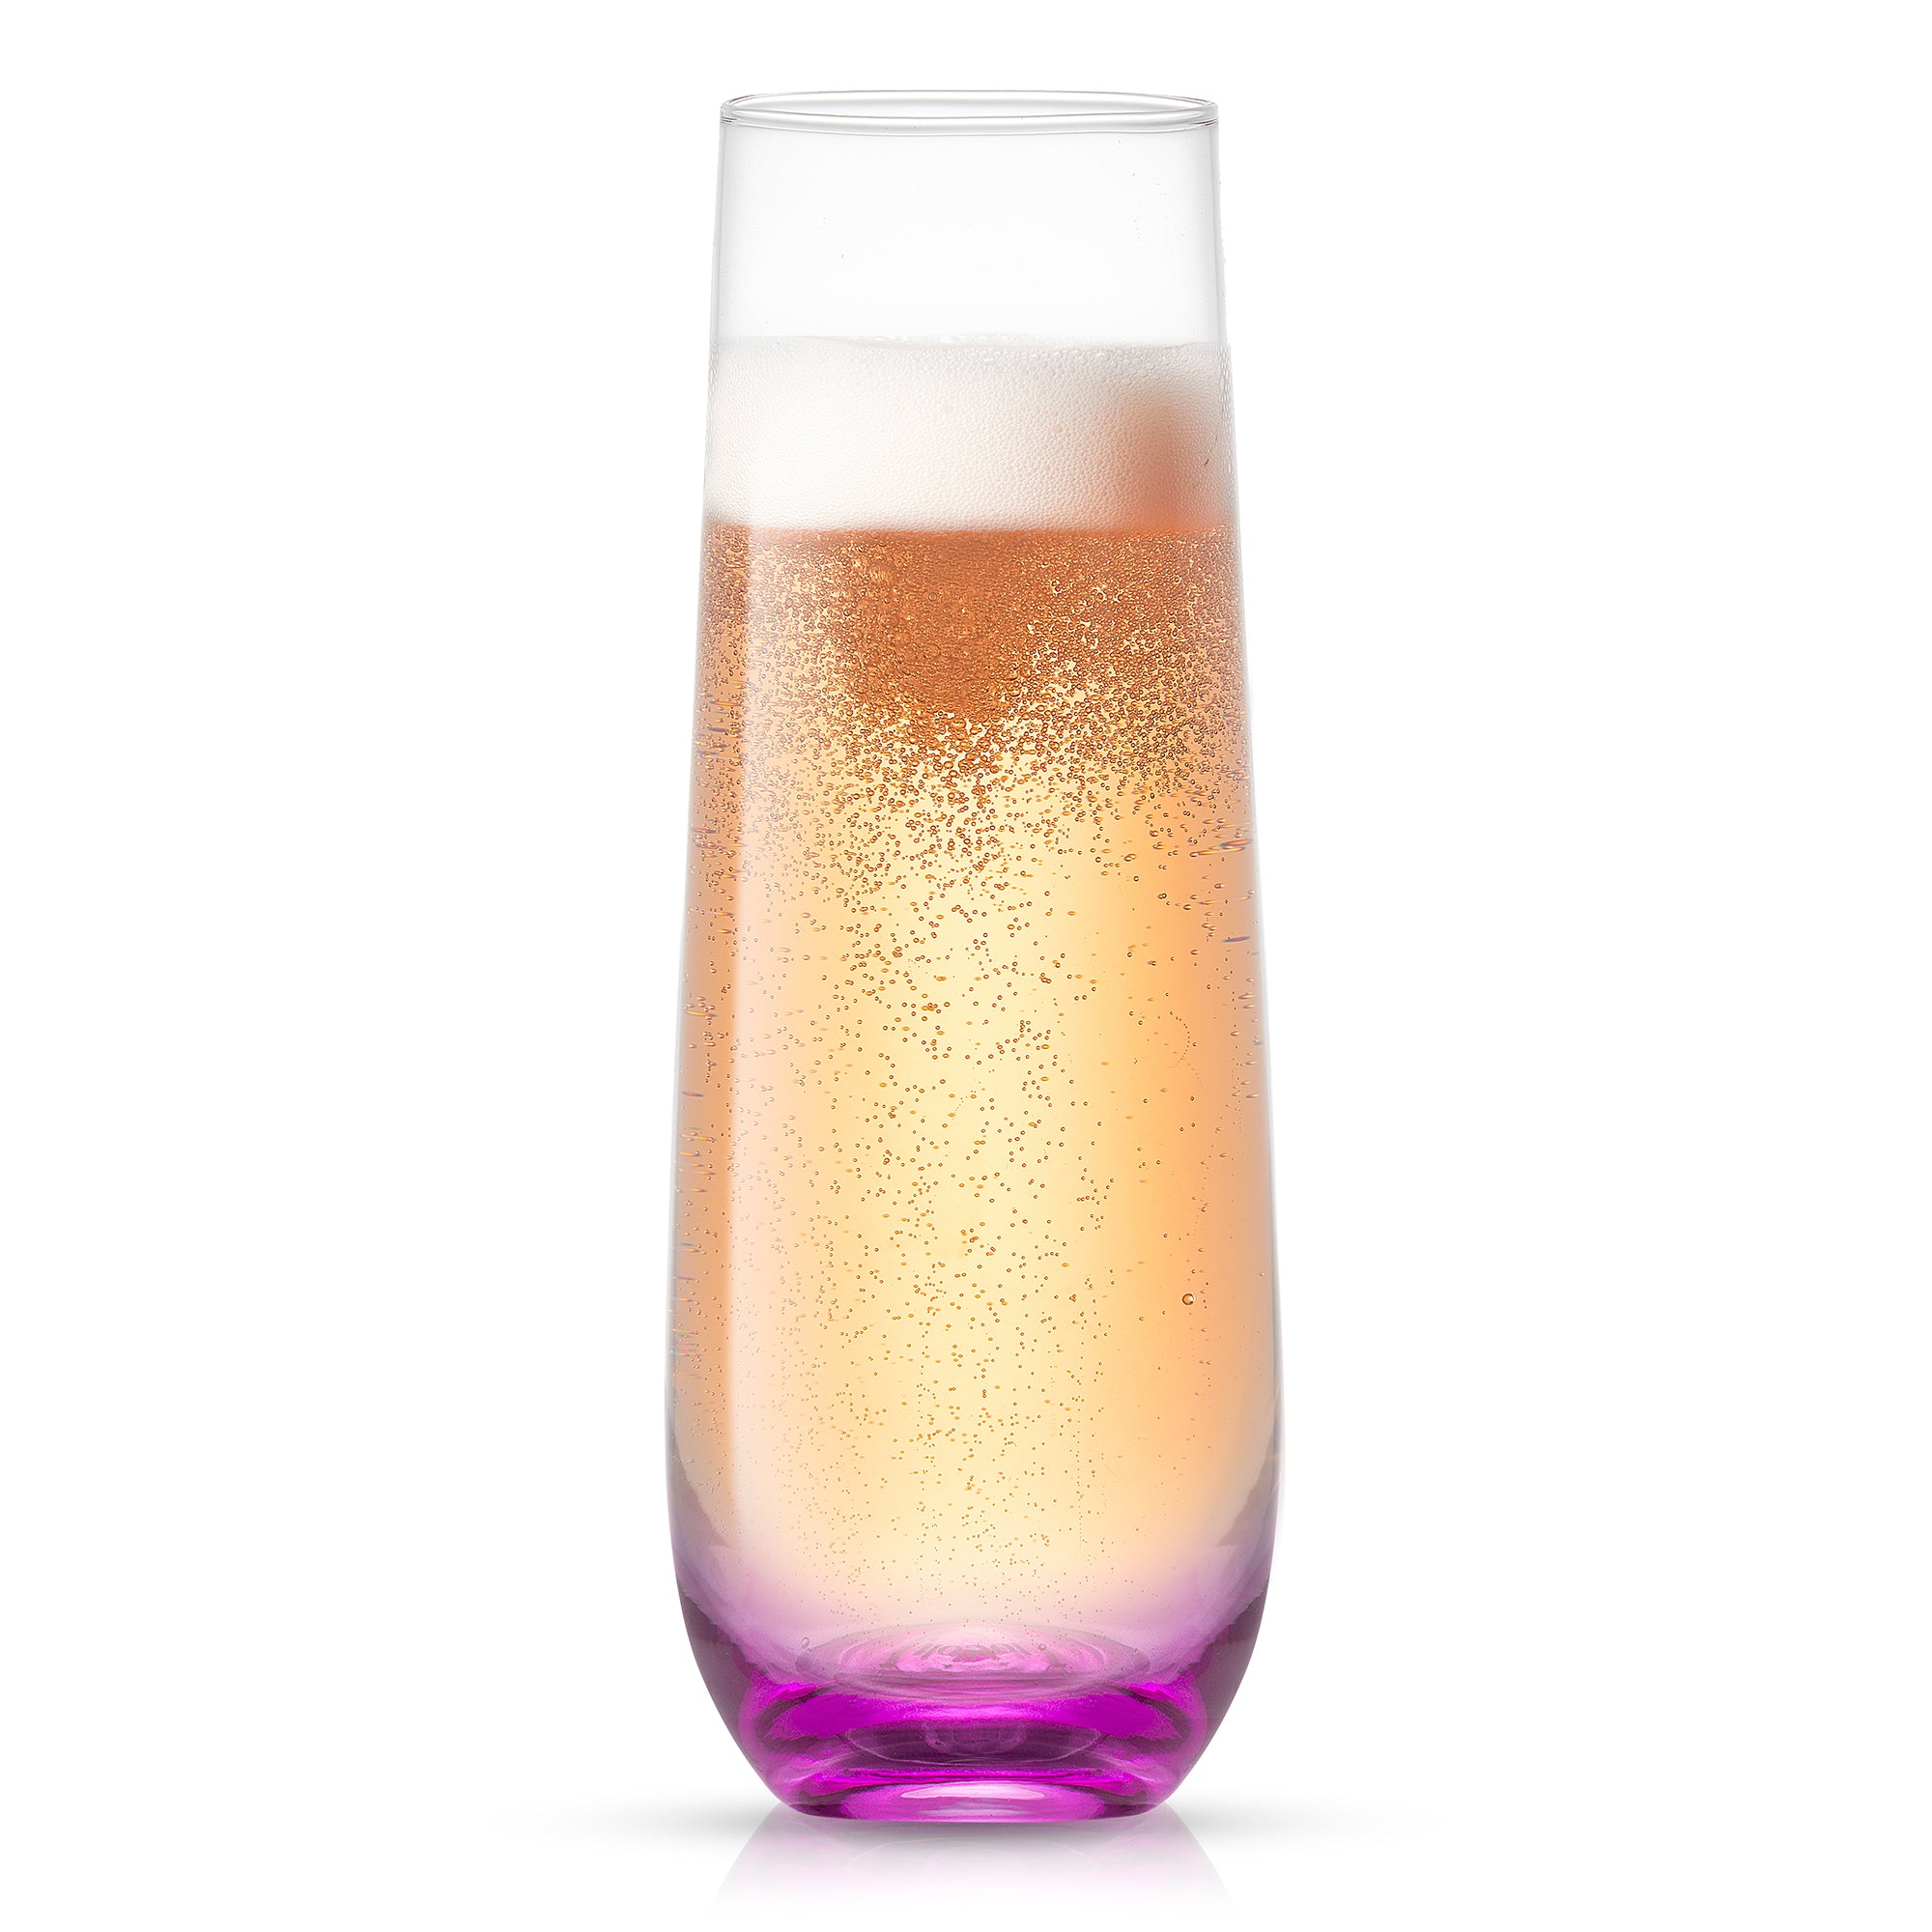 Hue Colored Stemless Champagne Flute Glass Set